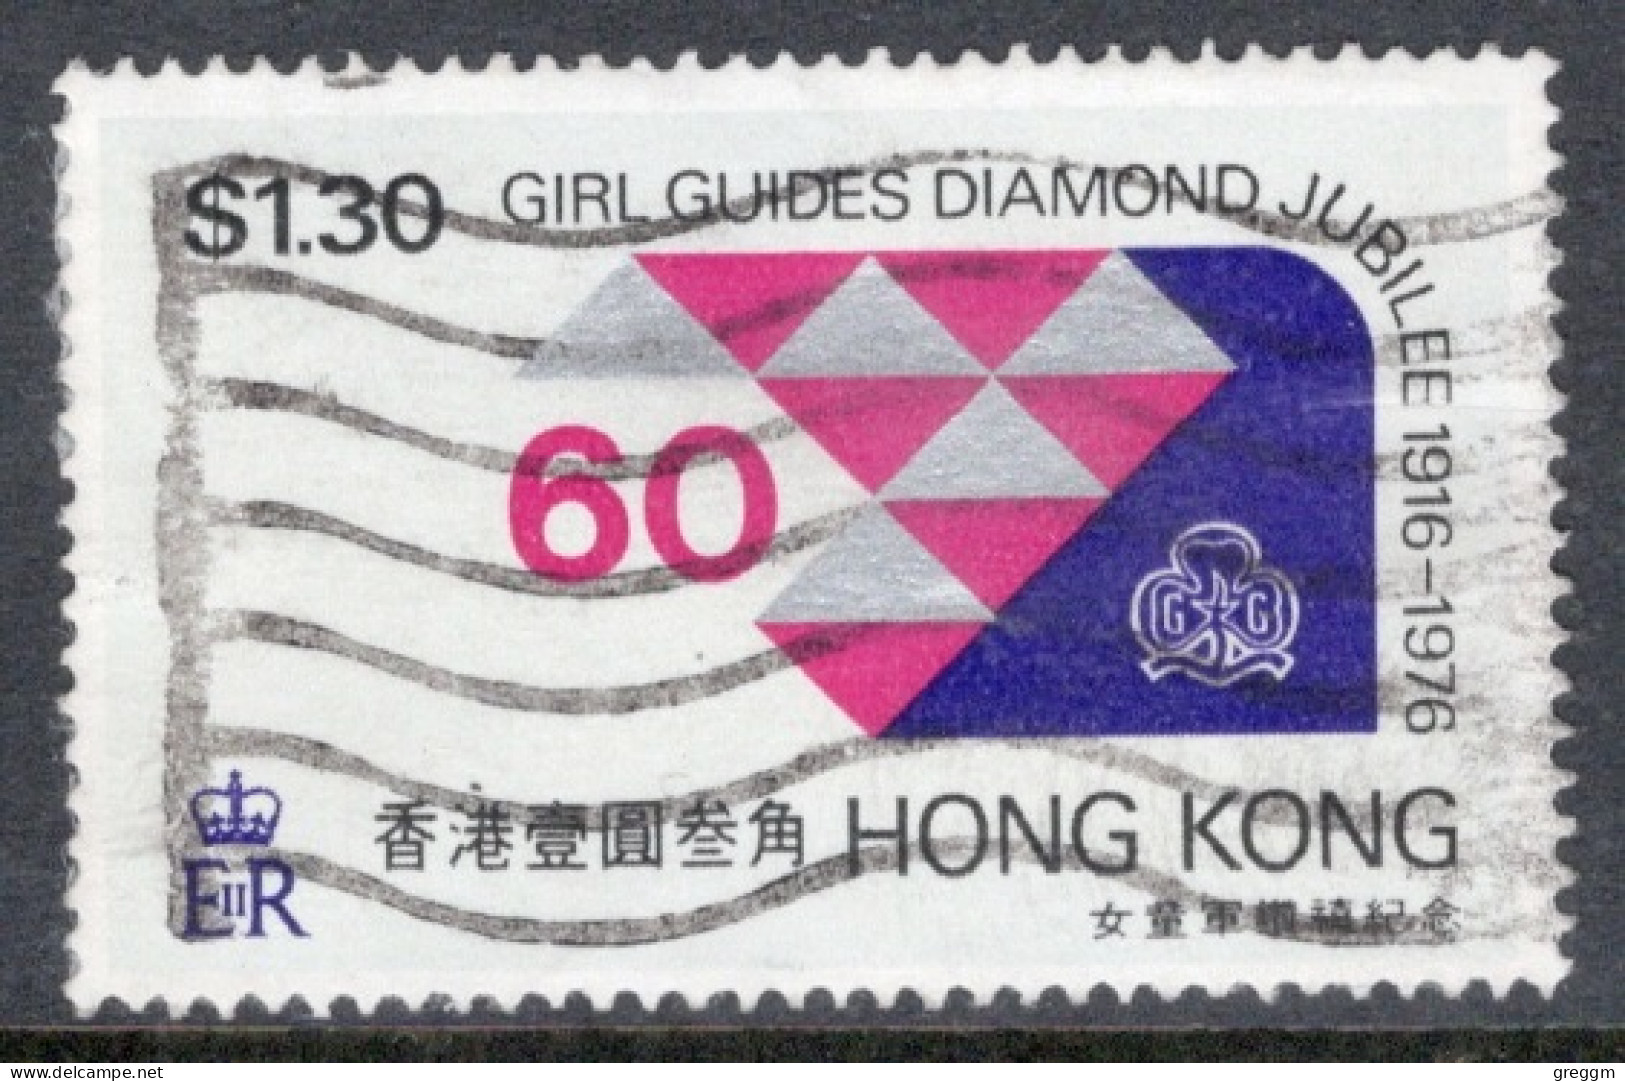 Hong Kong 1976 A Single Stamp To Celebrate The 60th Anniversary Of Girl Guides In Fine Used - Gebraucht